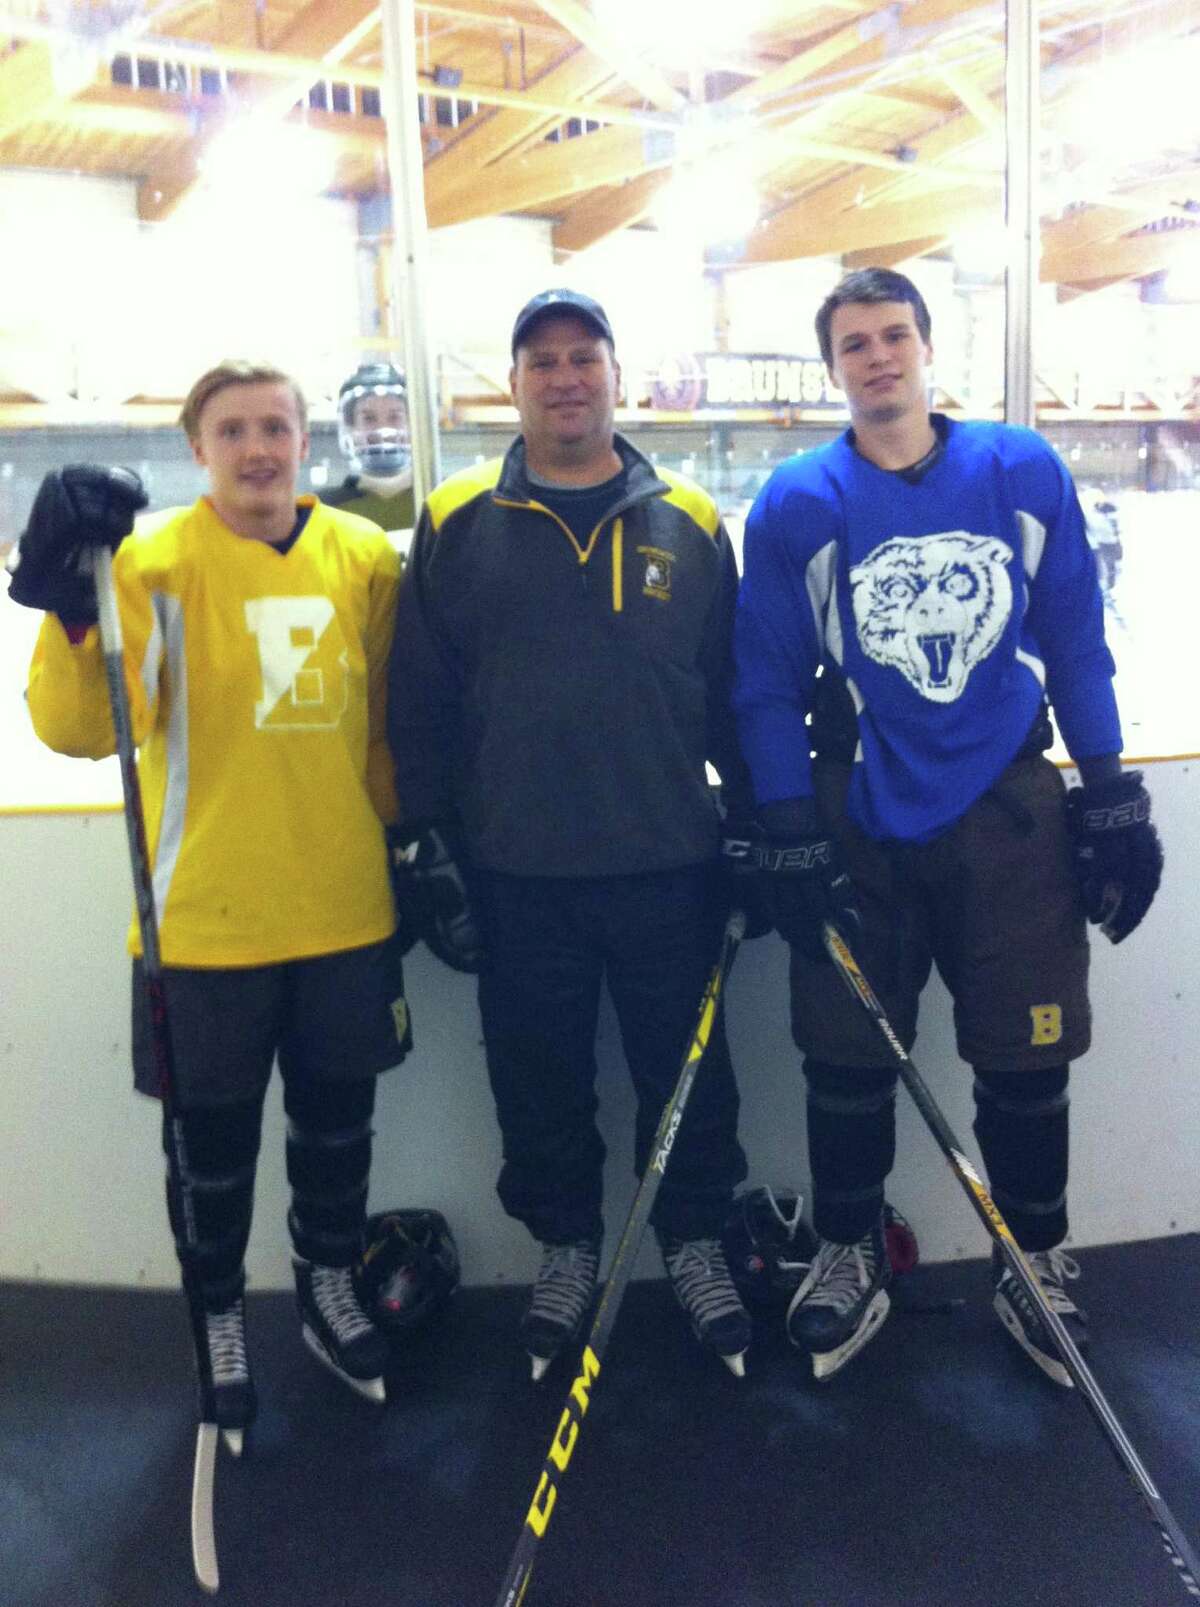 From left to right, co-captain Christian LeSueur, head coach Ron VanBelle and co-captain Nick VanBelle lead the Brunswick School hockey team into its new season.